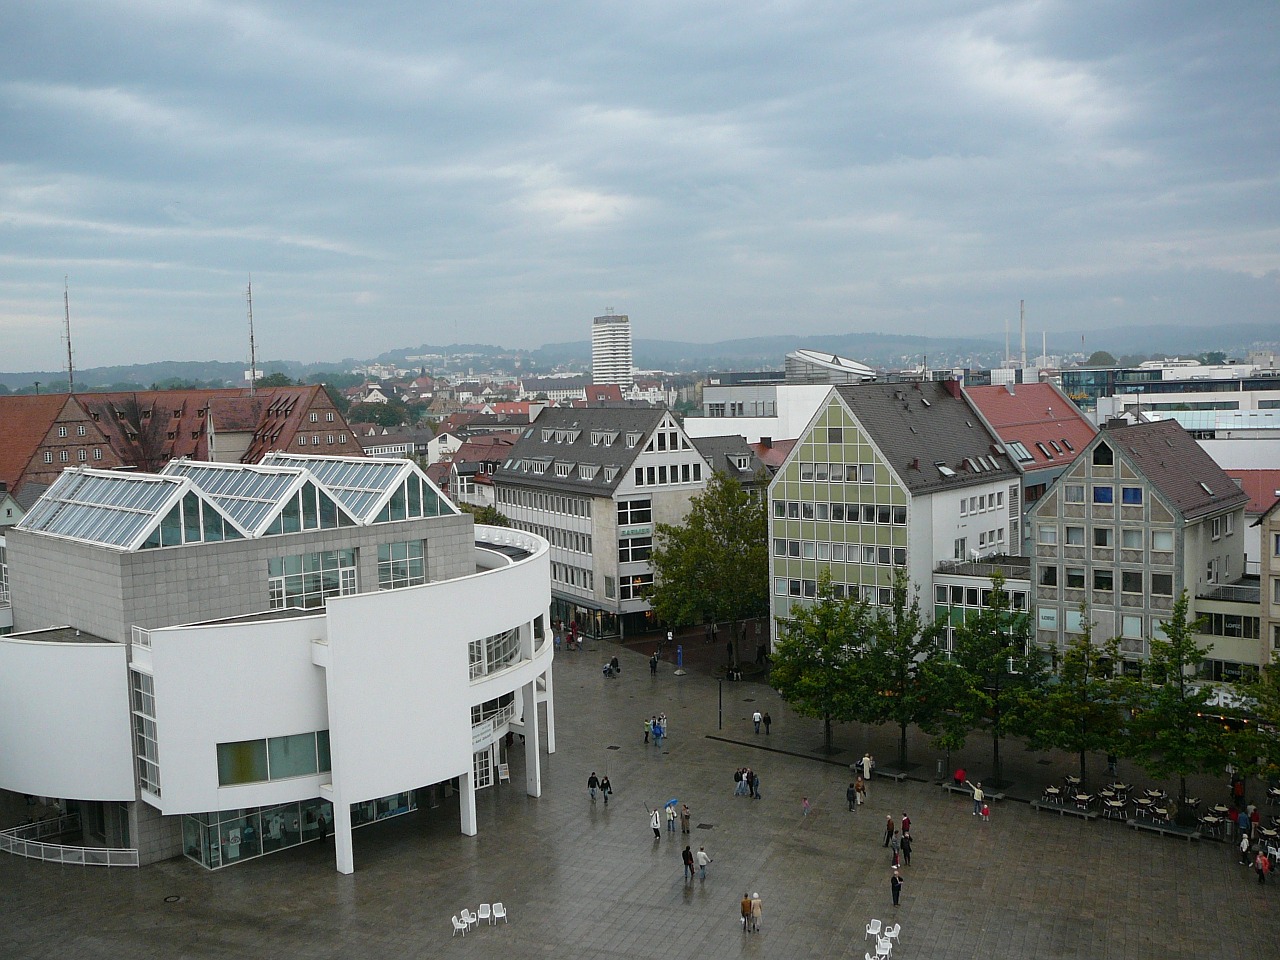 ulm richard meier construction cathedral square free photo